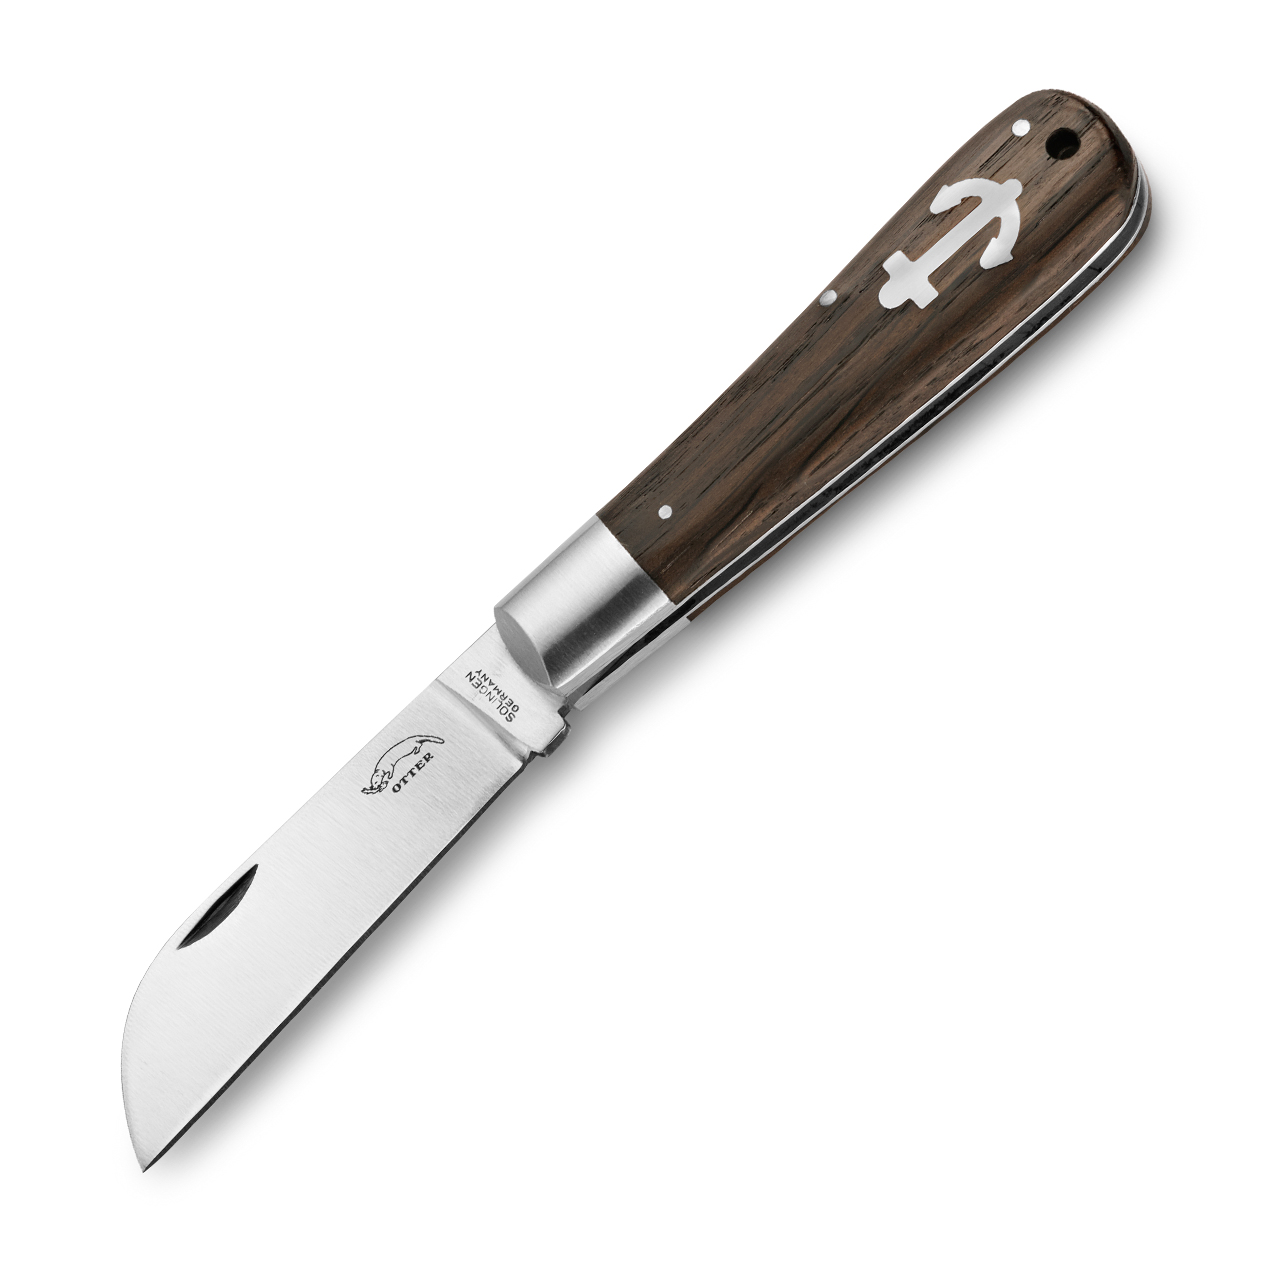 Anchor knife smoked oak small, without leather strap, Stainless steel  1.4034